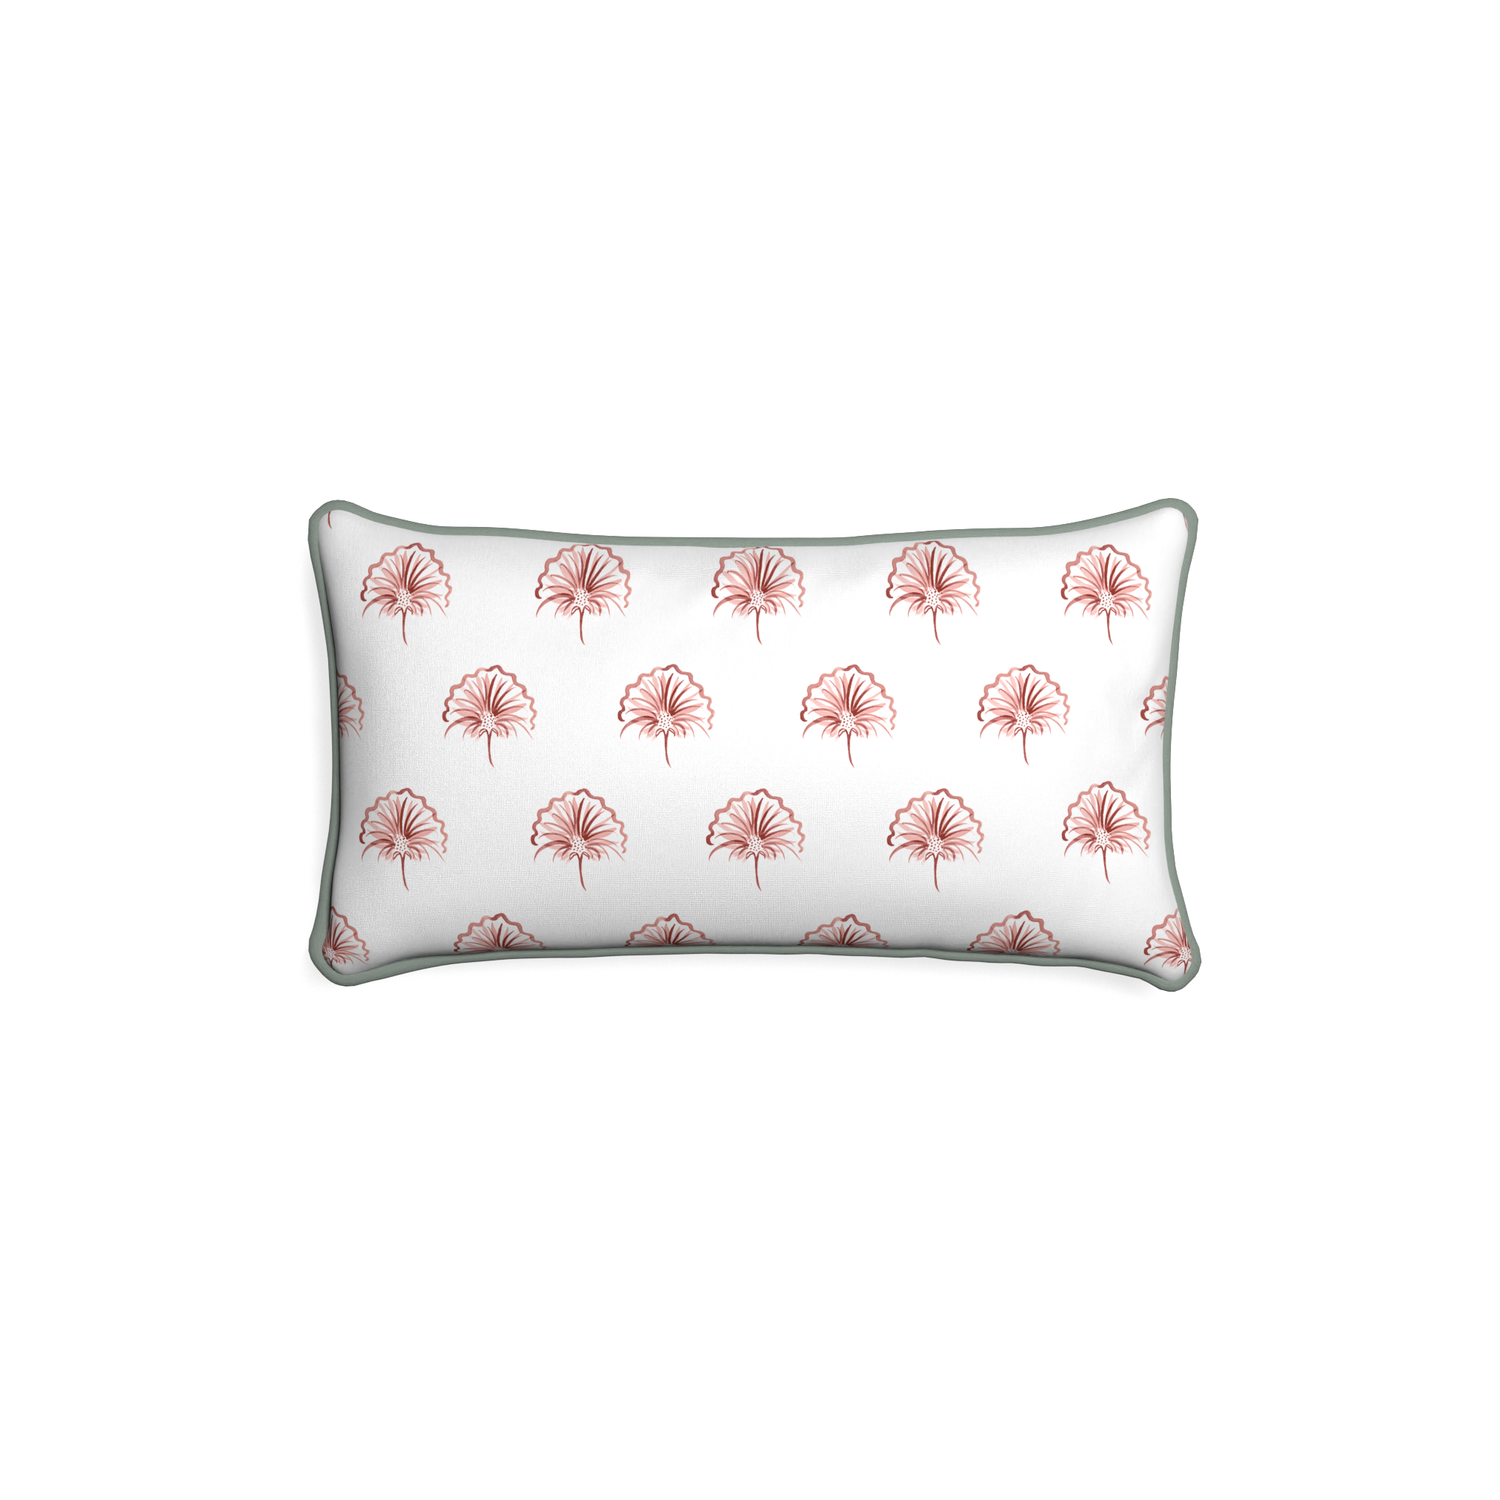 Petite-lumbar penelope rose custom floral pinkpillow with sage piping on white background